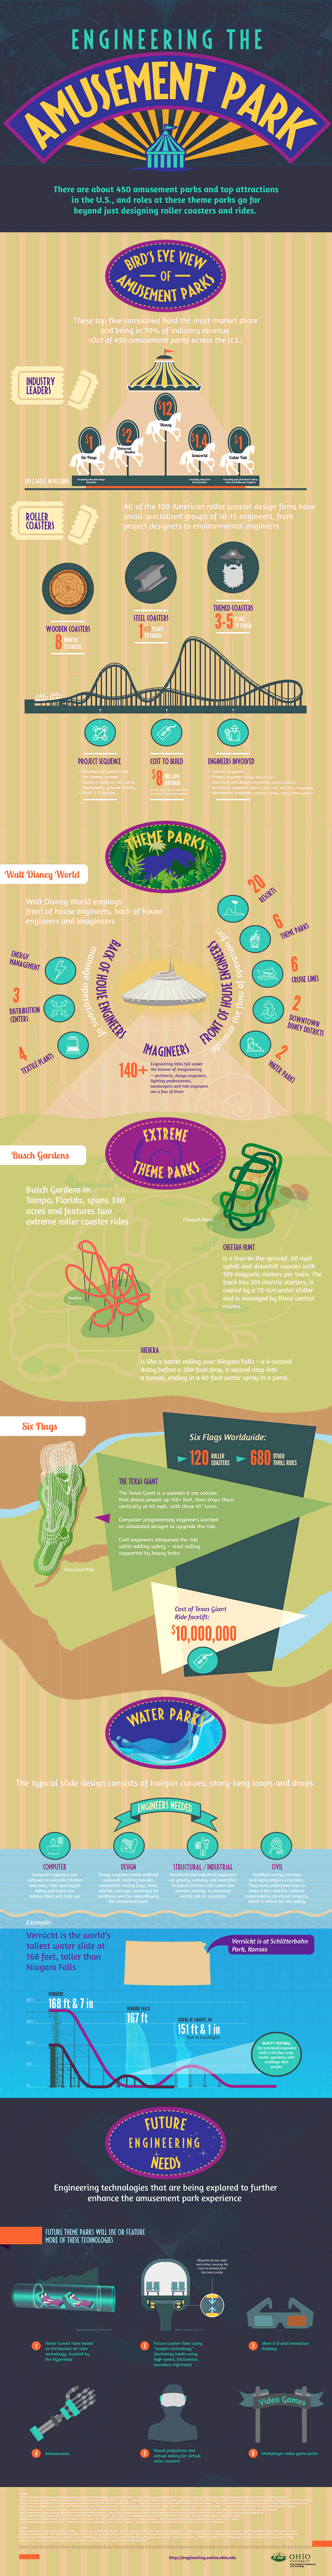 Amusement park and roller coaster engineering infographic